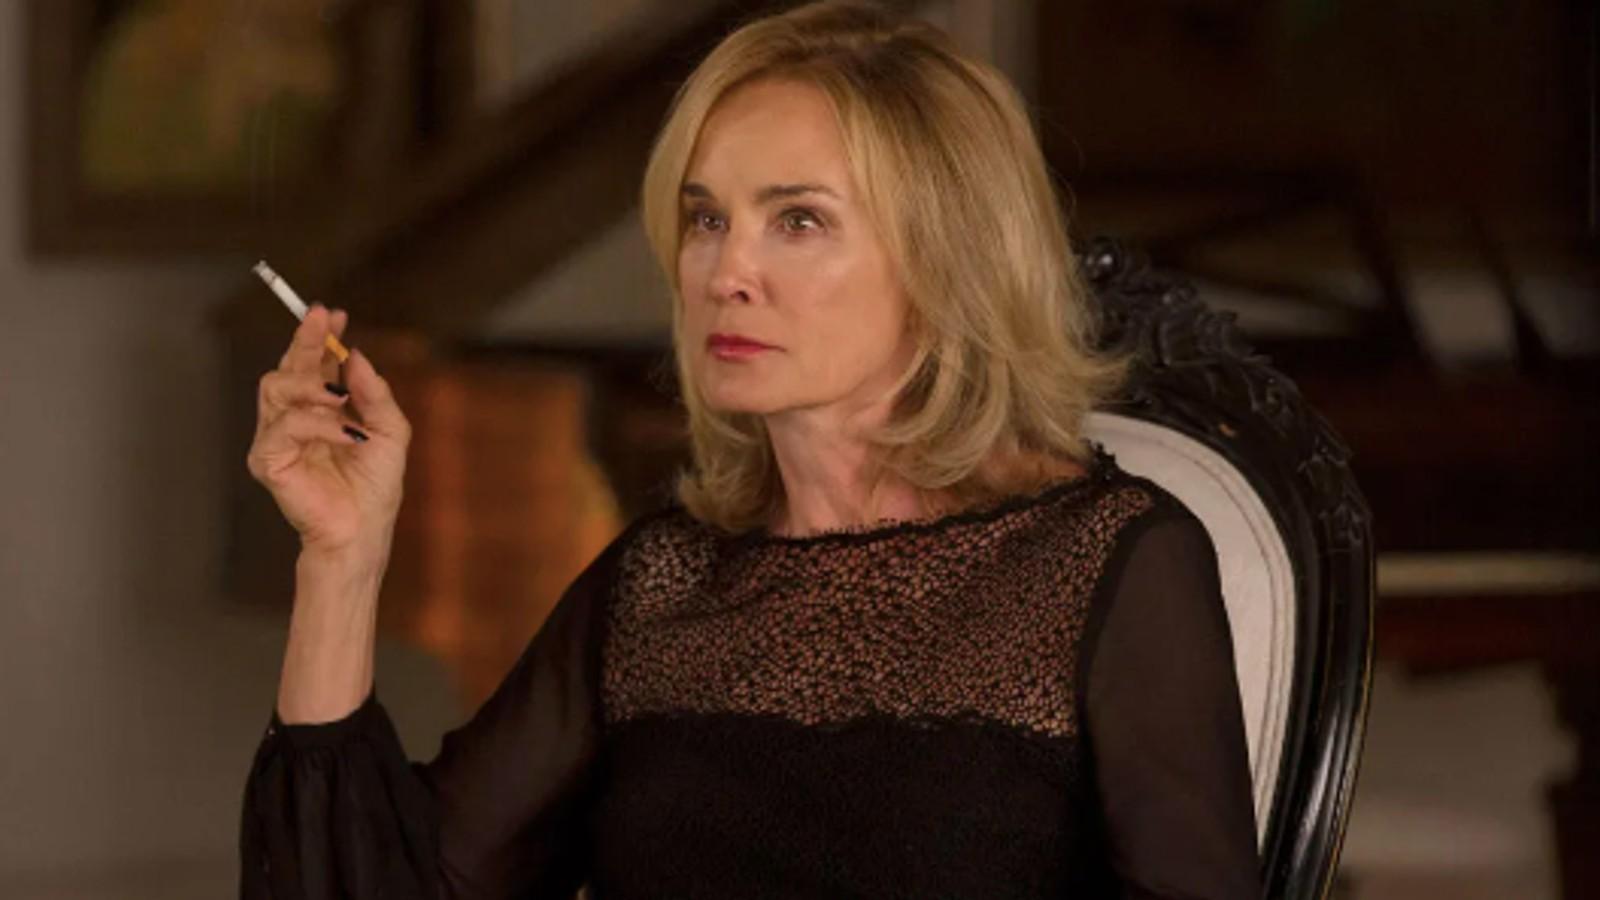 Jessica Lange as Fiona Goode in American Horror Story: Coven